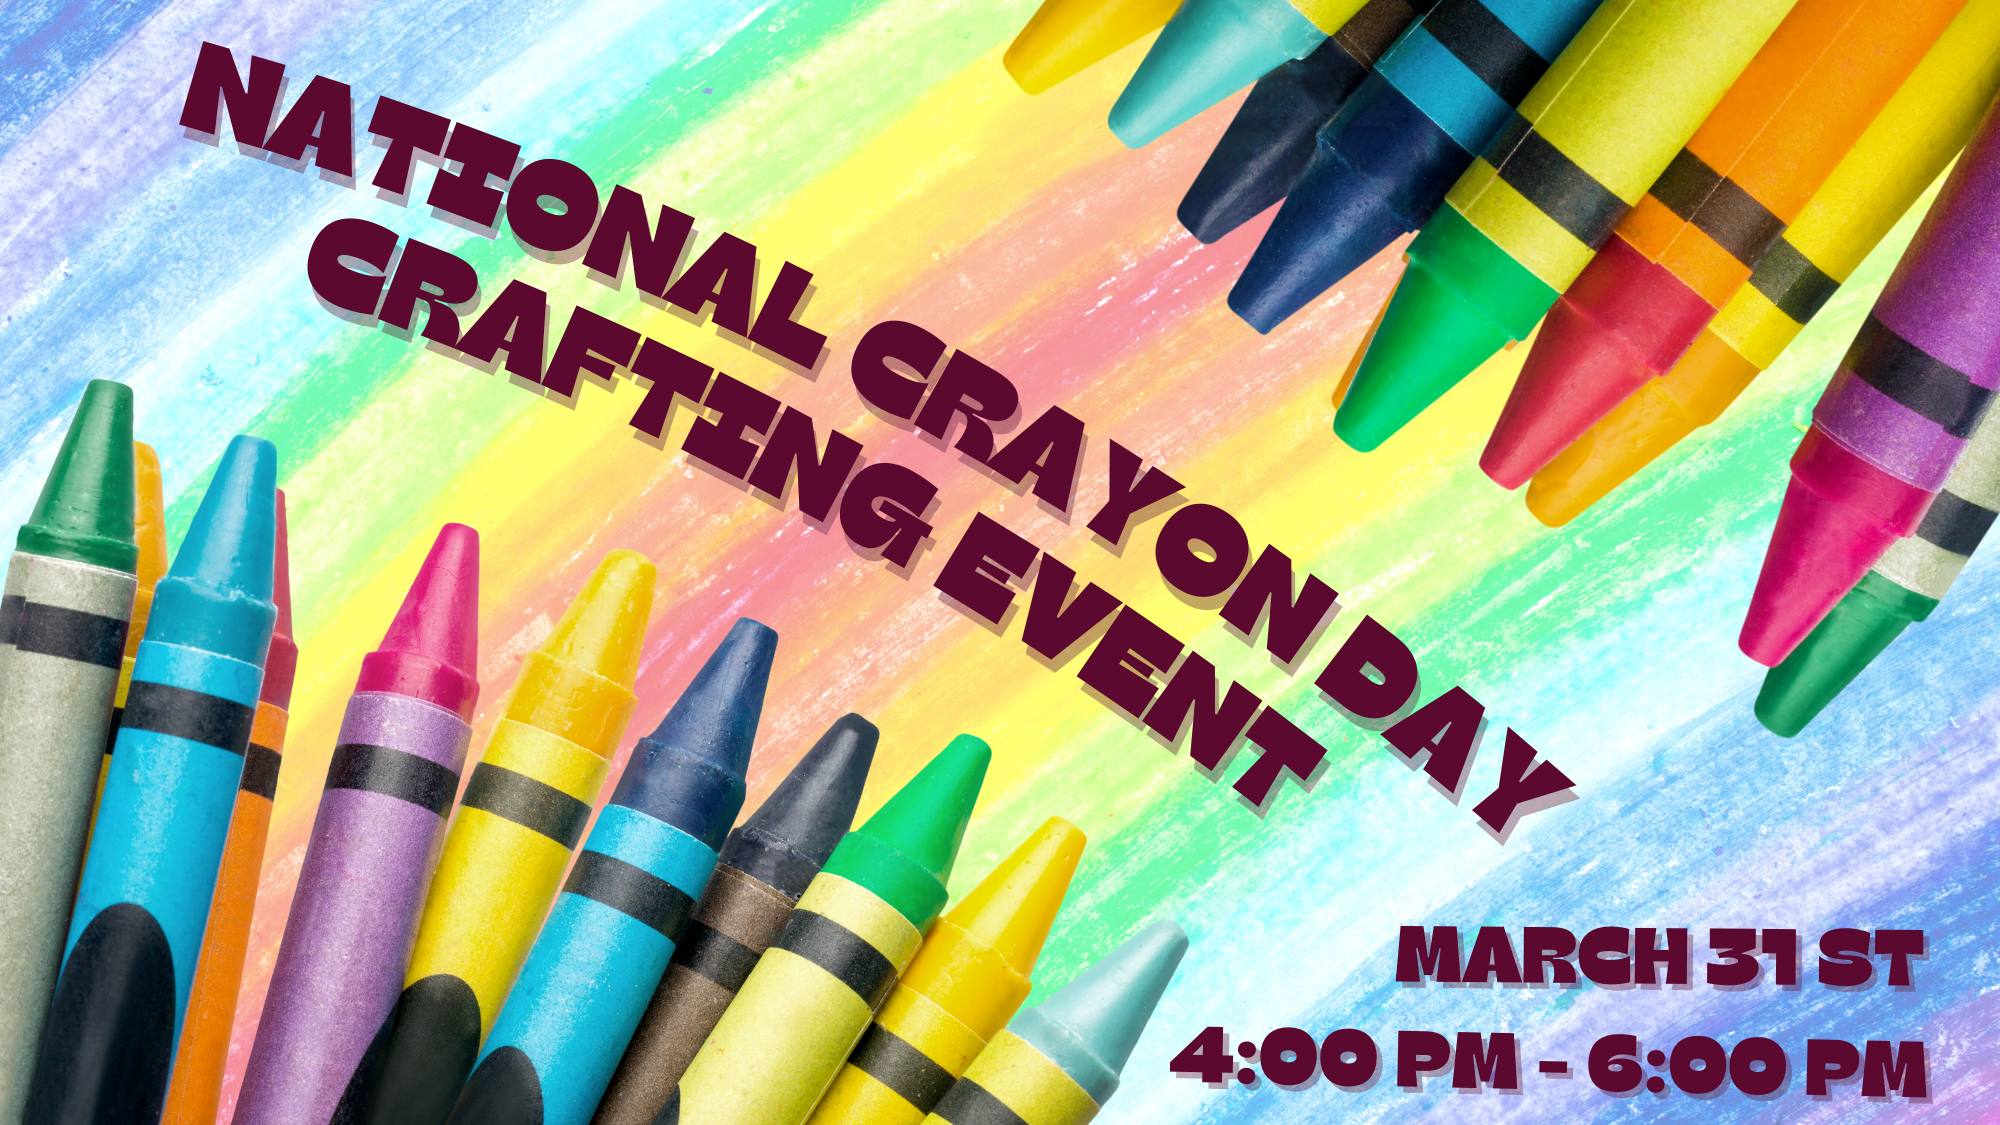 NATIONAL CRAYON DAY - MARCH 31 - National Day Calendar